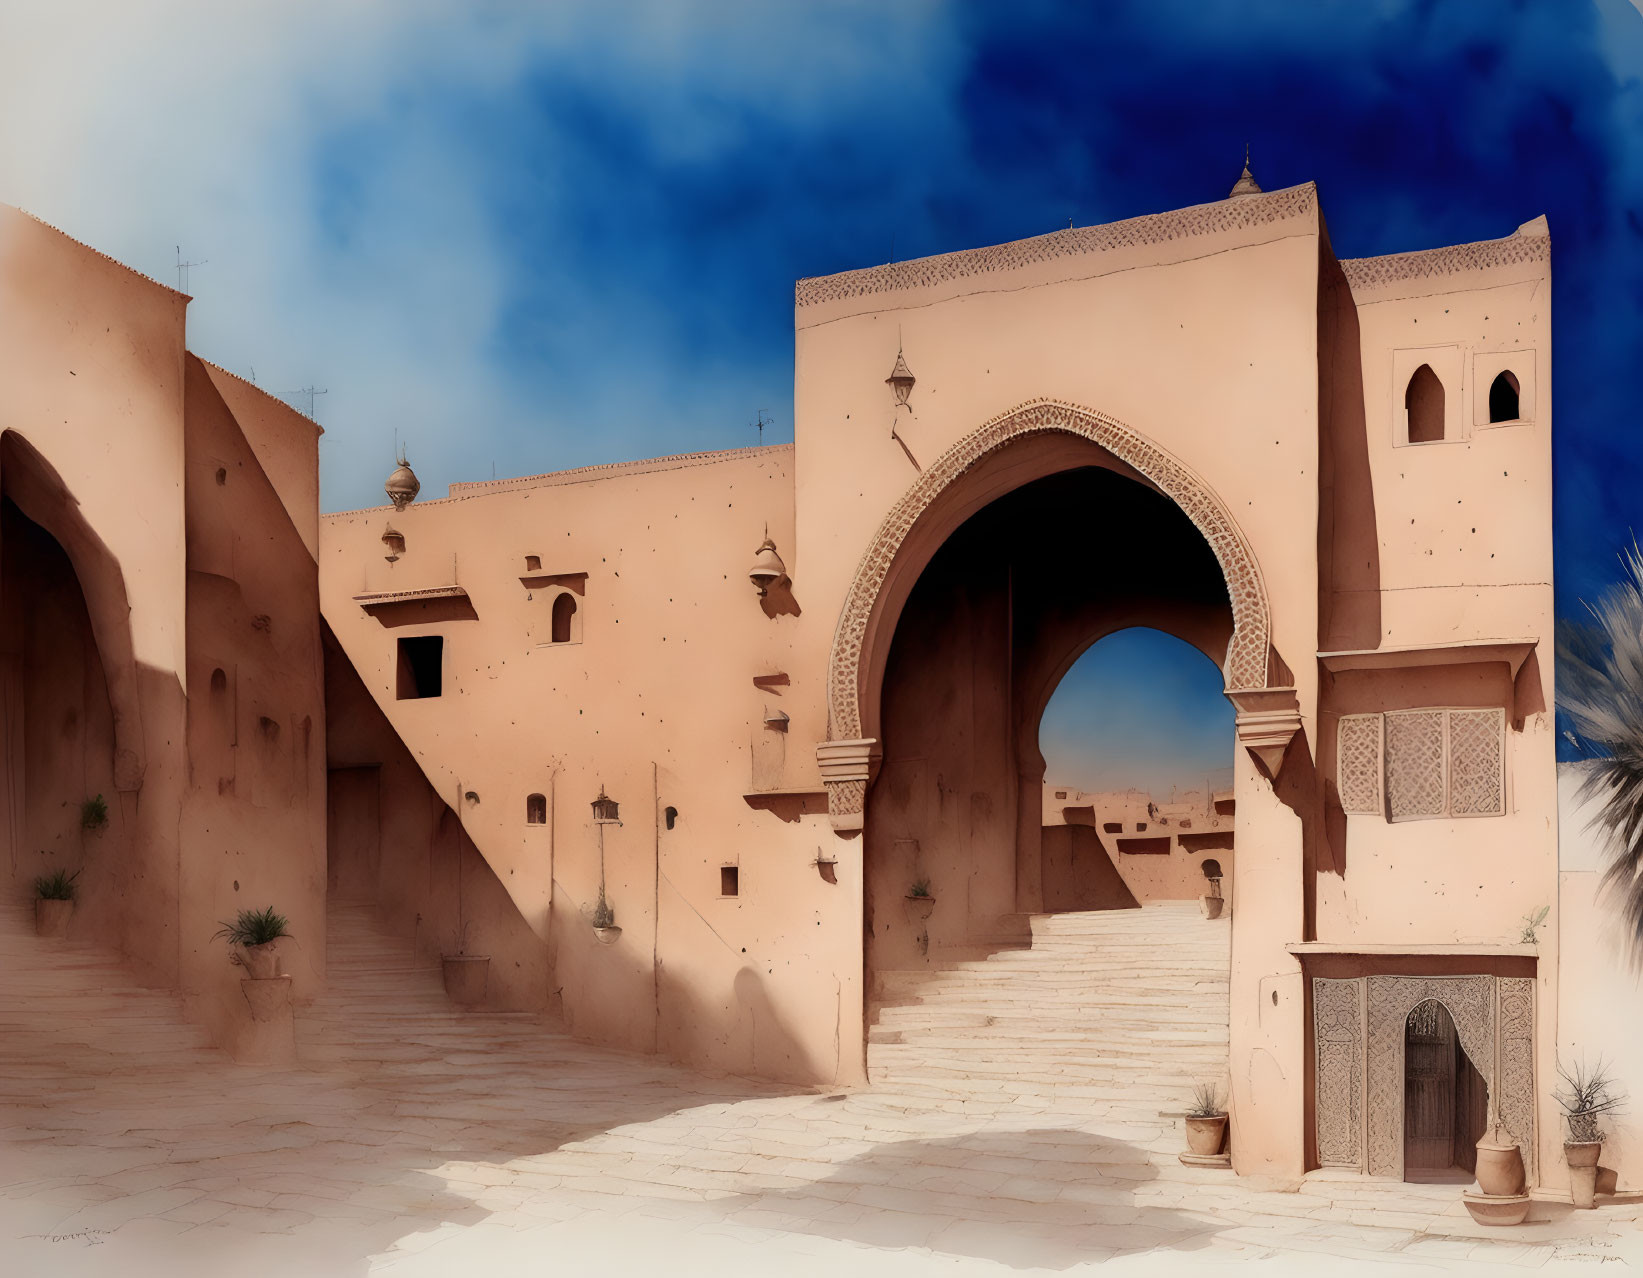 Desert Kasbah with Arched Entrance and Sandy Walls